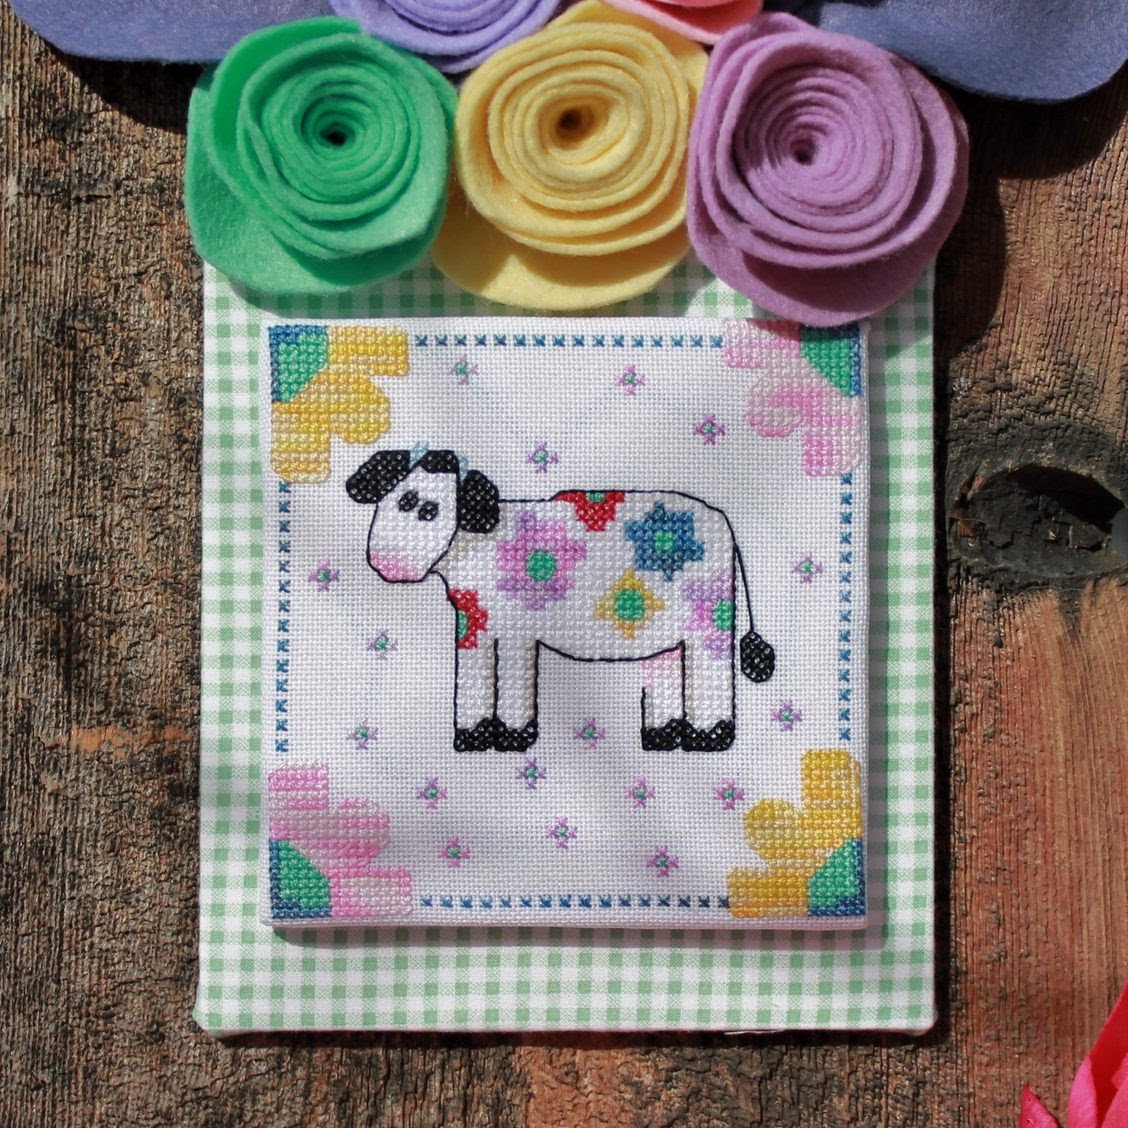 Flora Bloom (The Moo The Merrier) - LuHu Stitches - Cross Stitch Pattern